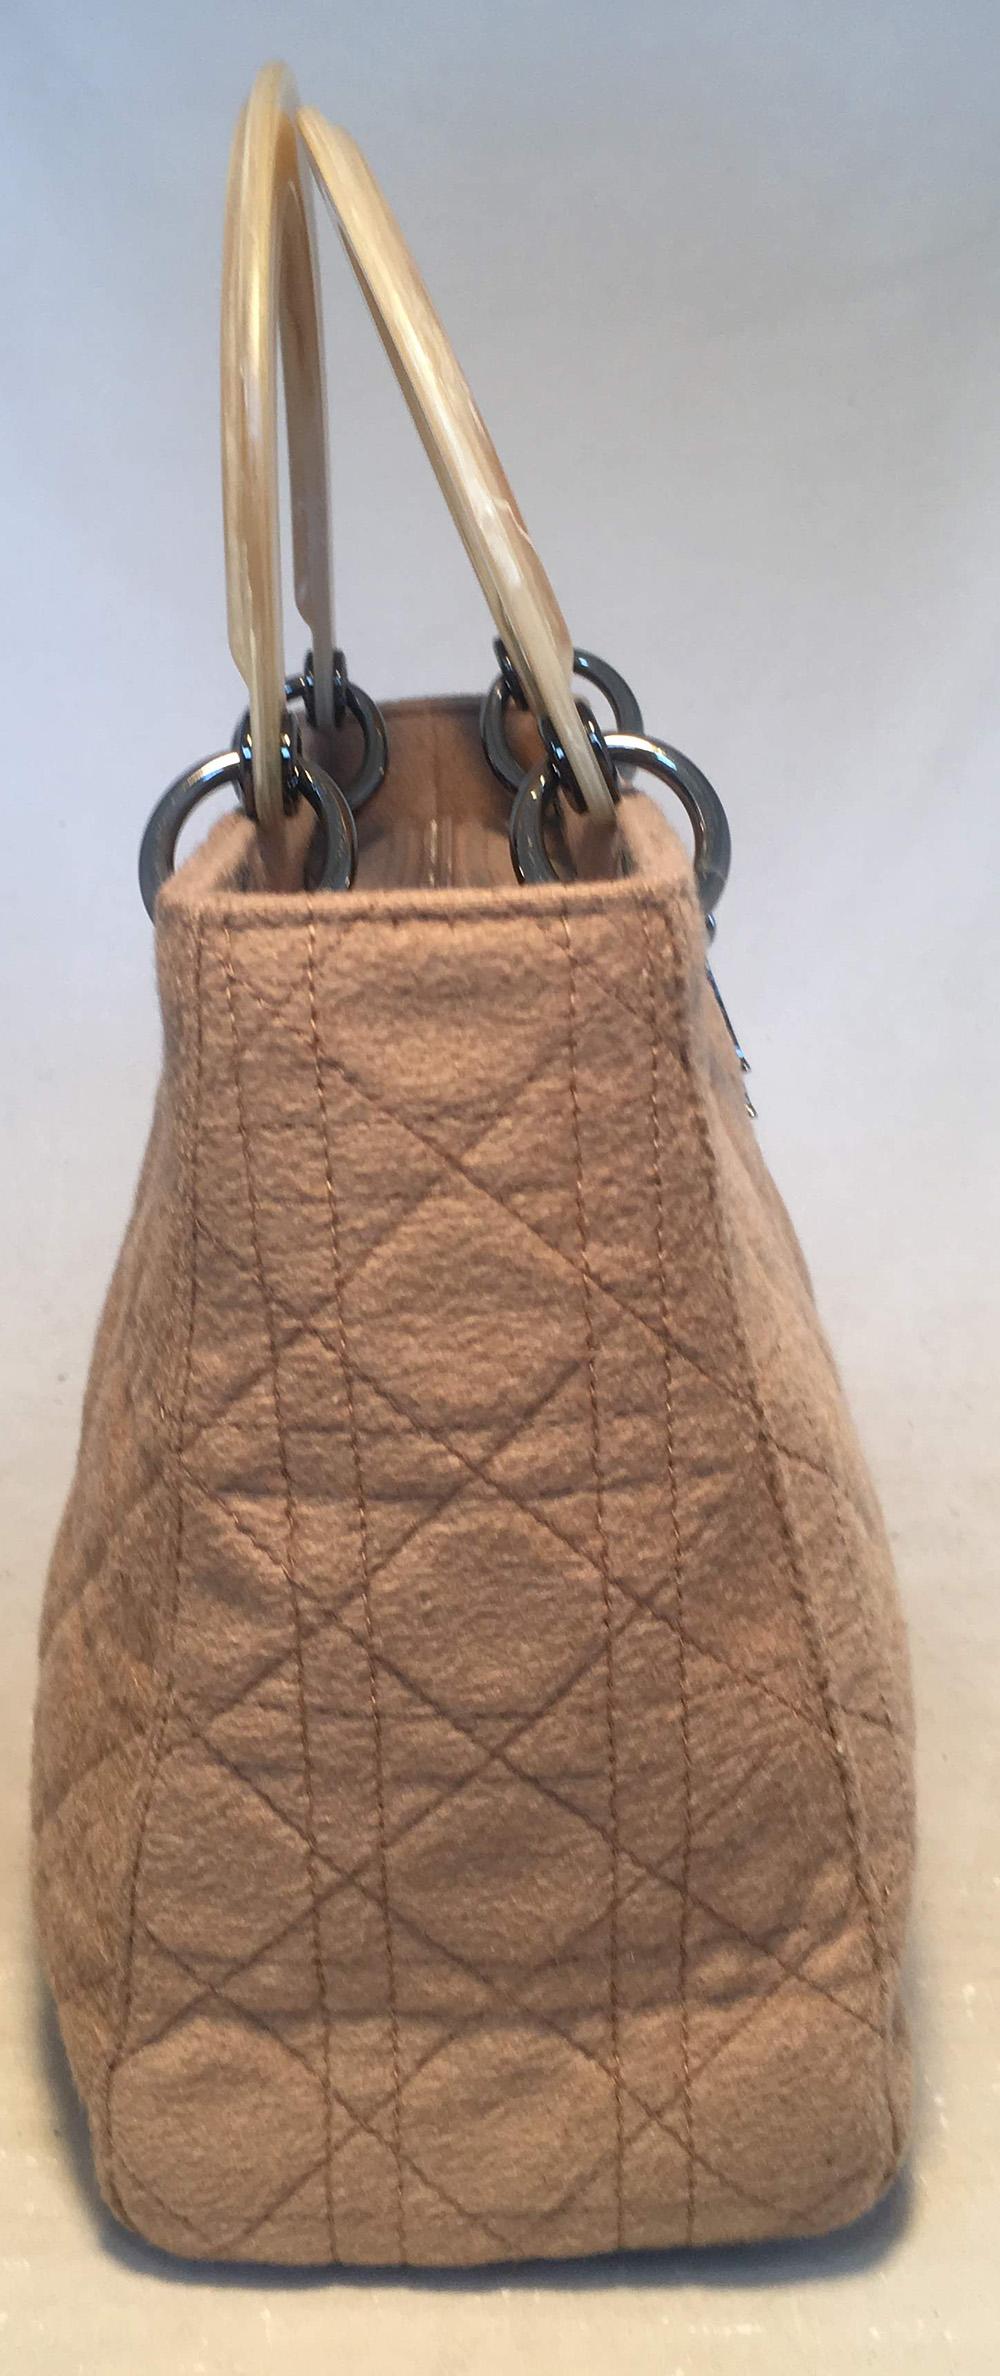 Christian Dior Tan Wool Cannage Quilted Medium Lady Di Bag excellent condition. Tan wool cannage quilted body trimmed with gunmetal hardware and beige brushed resin handles. Top flap snap closure opens to a brown nylon interior that holds one side